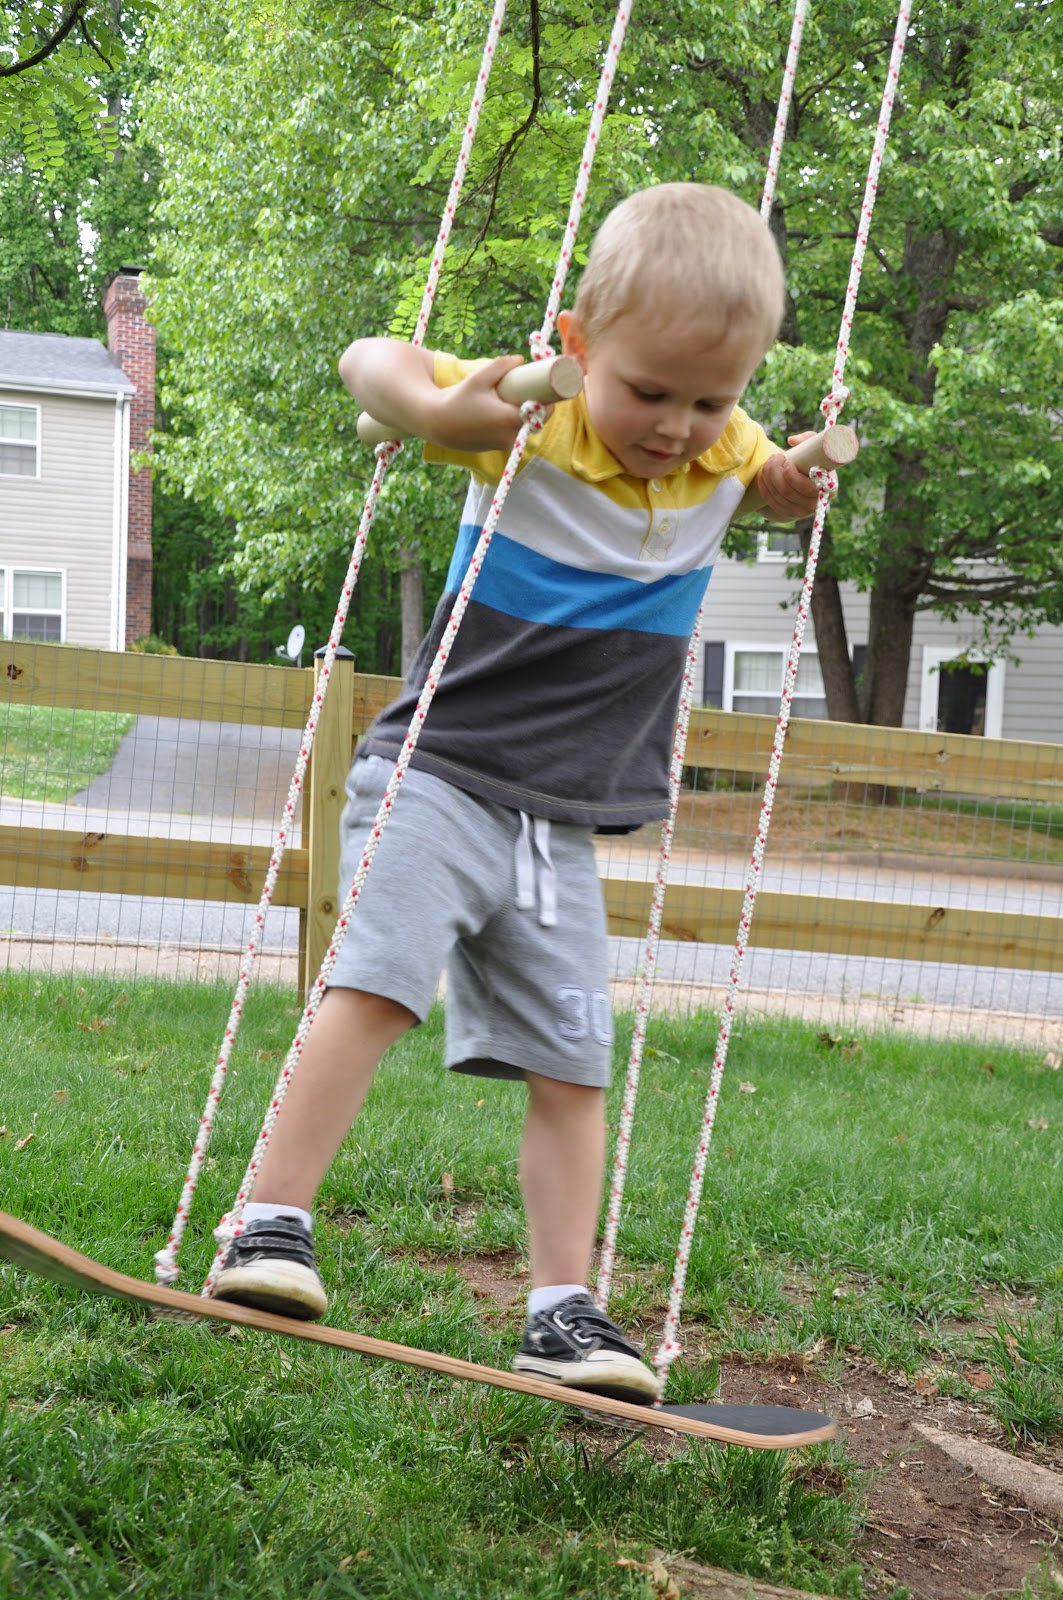 15 DIY Garden Swings You Can Make For Your Kids